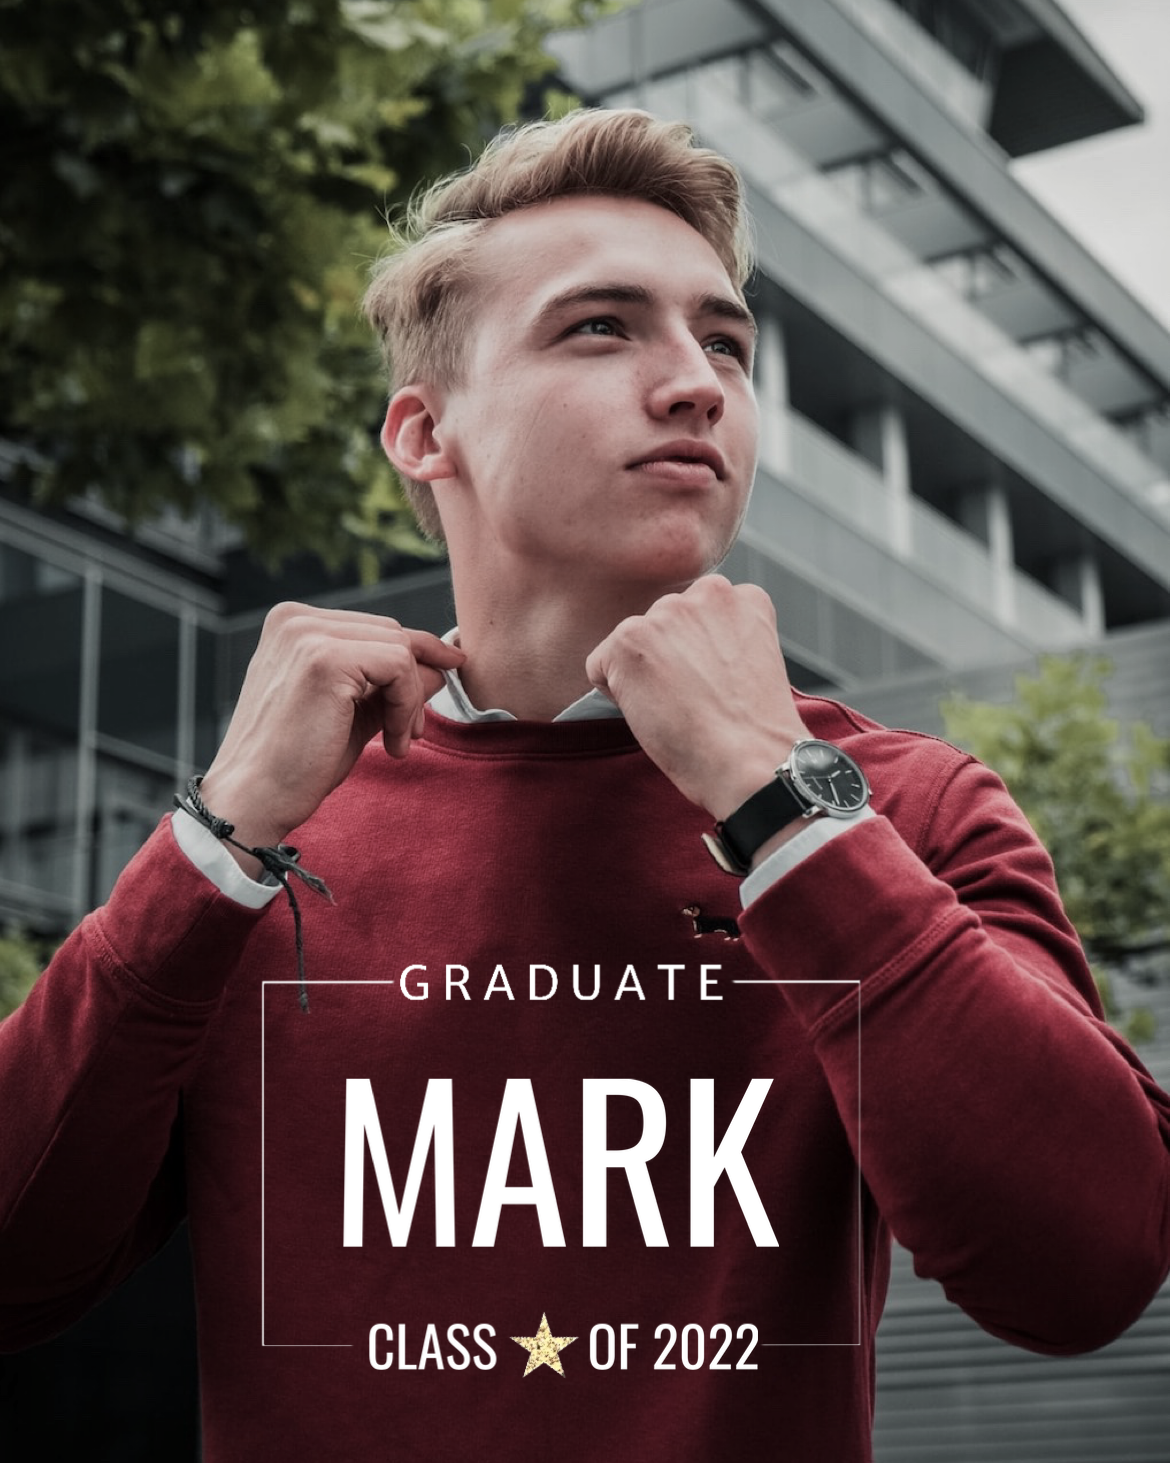 A Young Man Wearing A Maroon Sweatshirt With The Words Graduate Mark On It Graduation Template